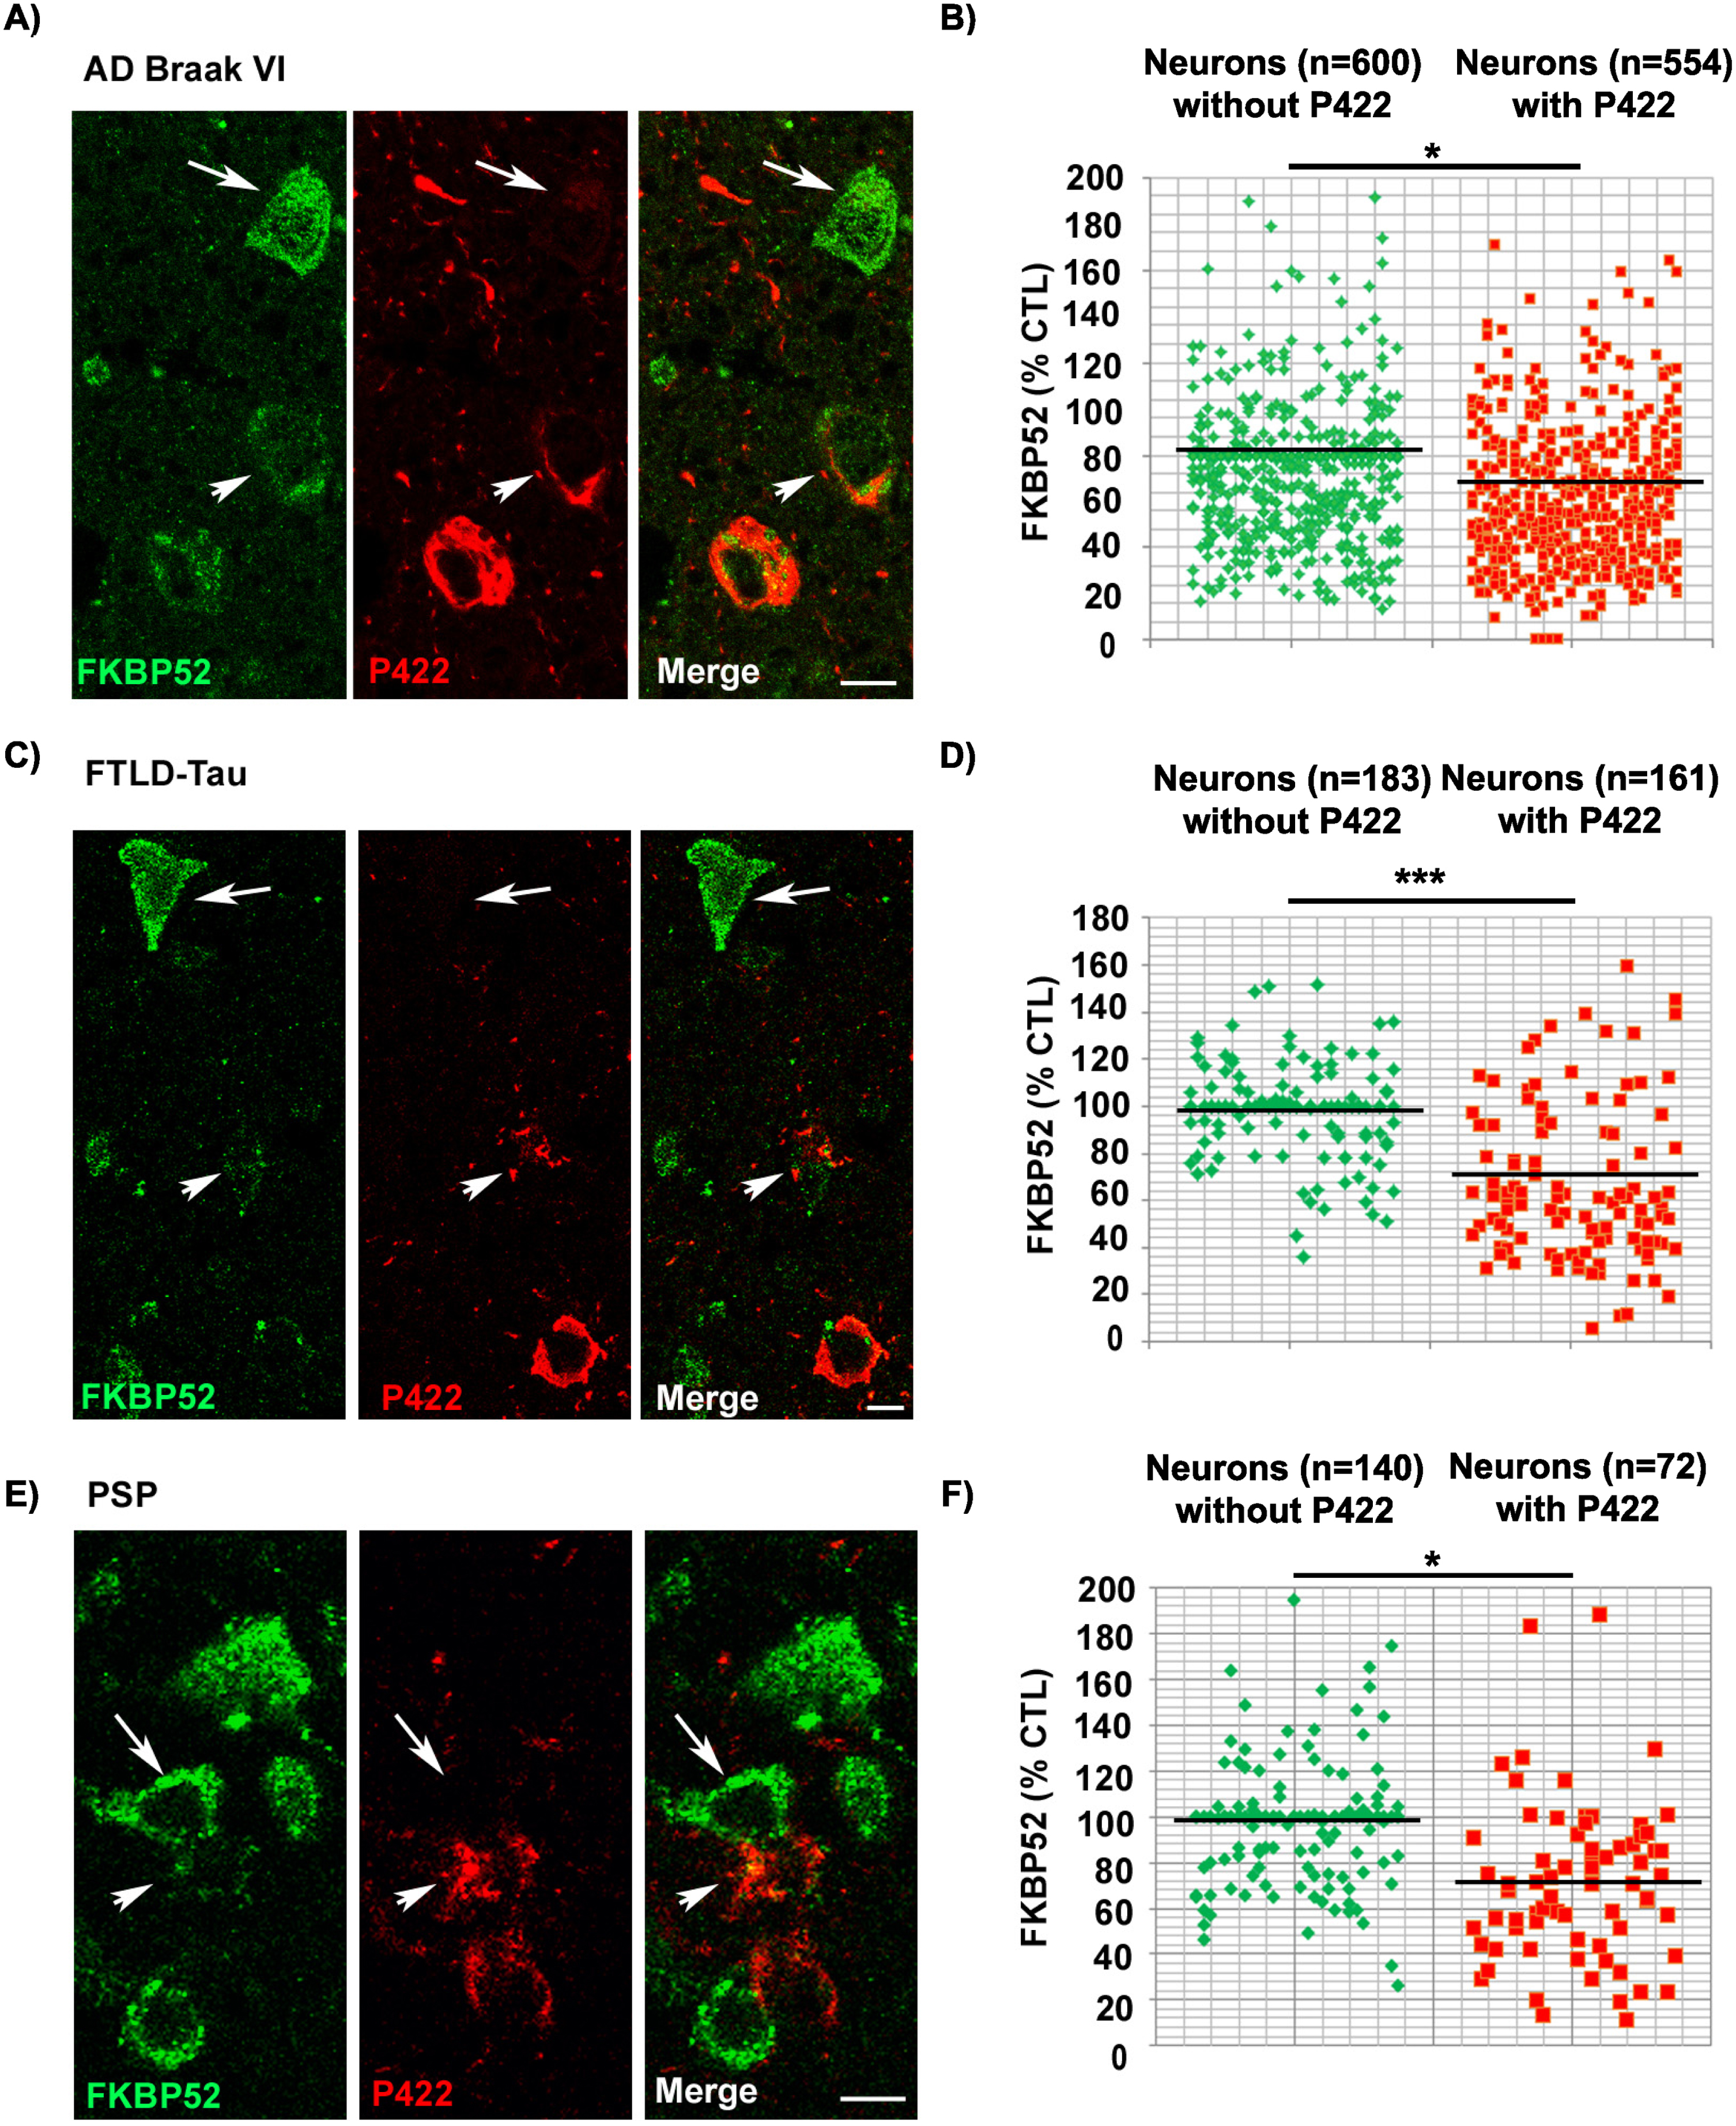 Image analysis results showing the decrease of FKBP52 expression in neurons with Tau-pS422 deposits in the frontal cortex of patients with different tauopathies. A, C, E) FKBP52 expression (green) is visibly decreased in Tau-pS422 (P422, red) positive neurons of AD Braak VI, familial FTLD-Tau and PSP patients respectively (arrowheads) compared with adjacent neurons devoid of evident Tau-pS422 deposits (arrows). B, D, F) Scatter diagrams of image analysis results showing a significant decrease of FKBP52 expression in Tau-pS422 positive neurons of AD Braak VI, familial FTLD-Tau, and PSP patients respectively. Statistical analysis was performed using Student’s t-test, *p < 0.05, ***p < 0.001,±SEM.